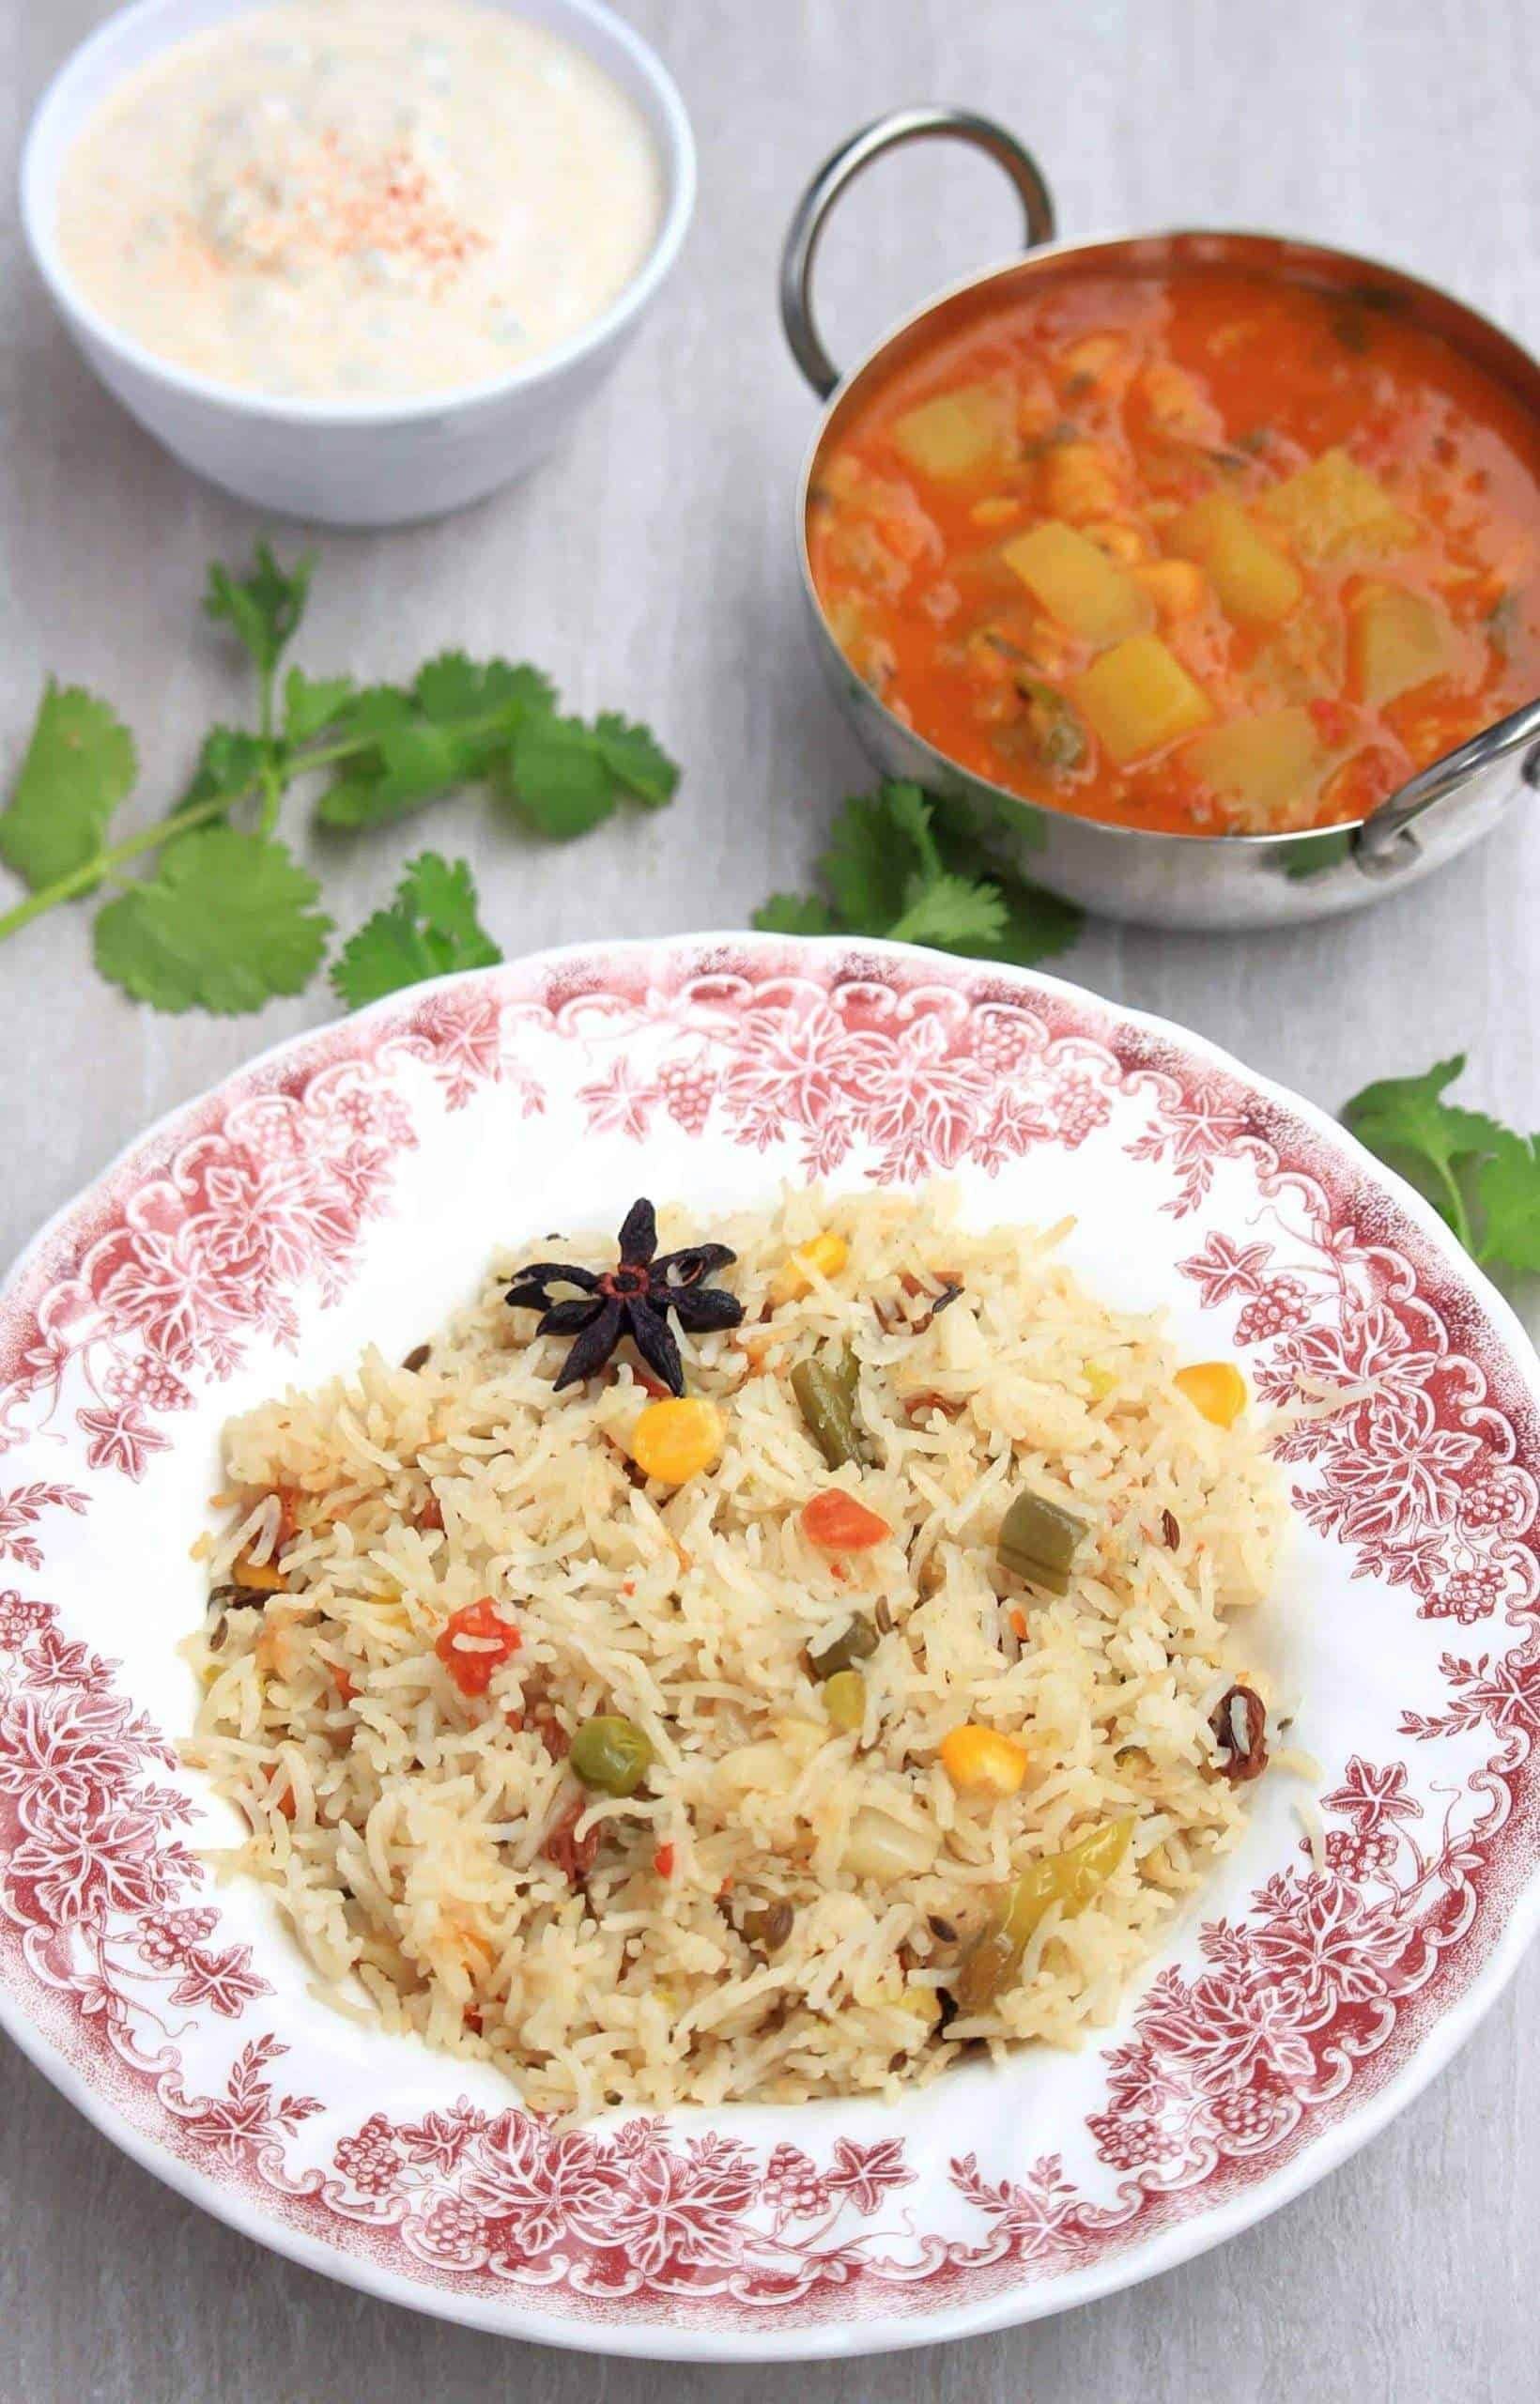 Vegetable Pulao served in a dish.